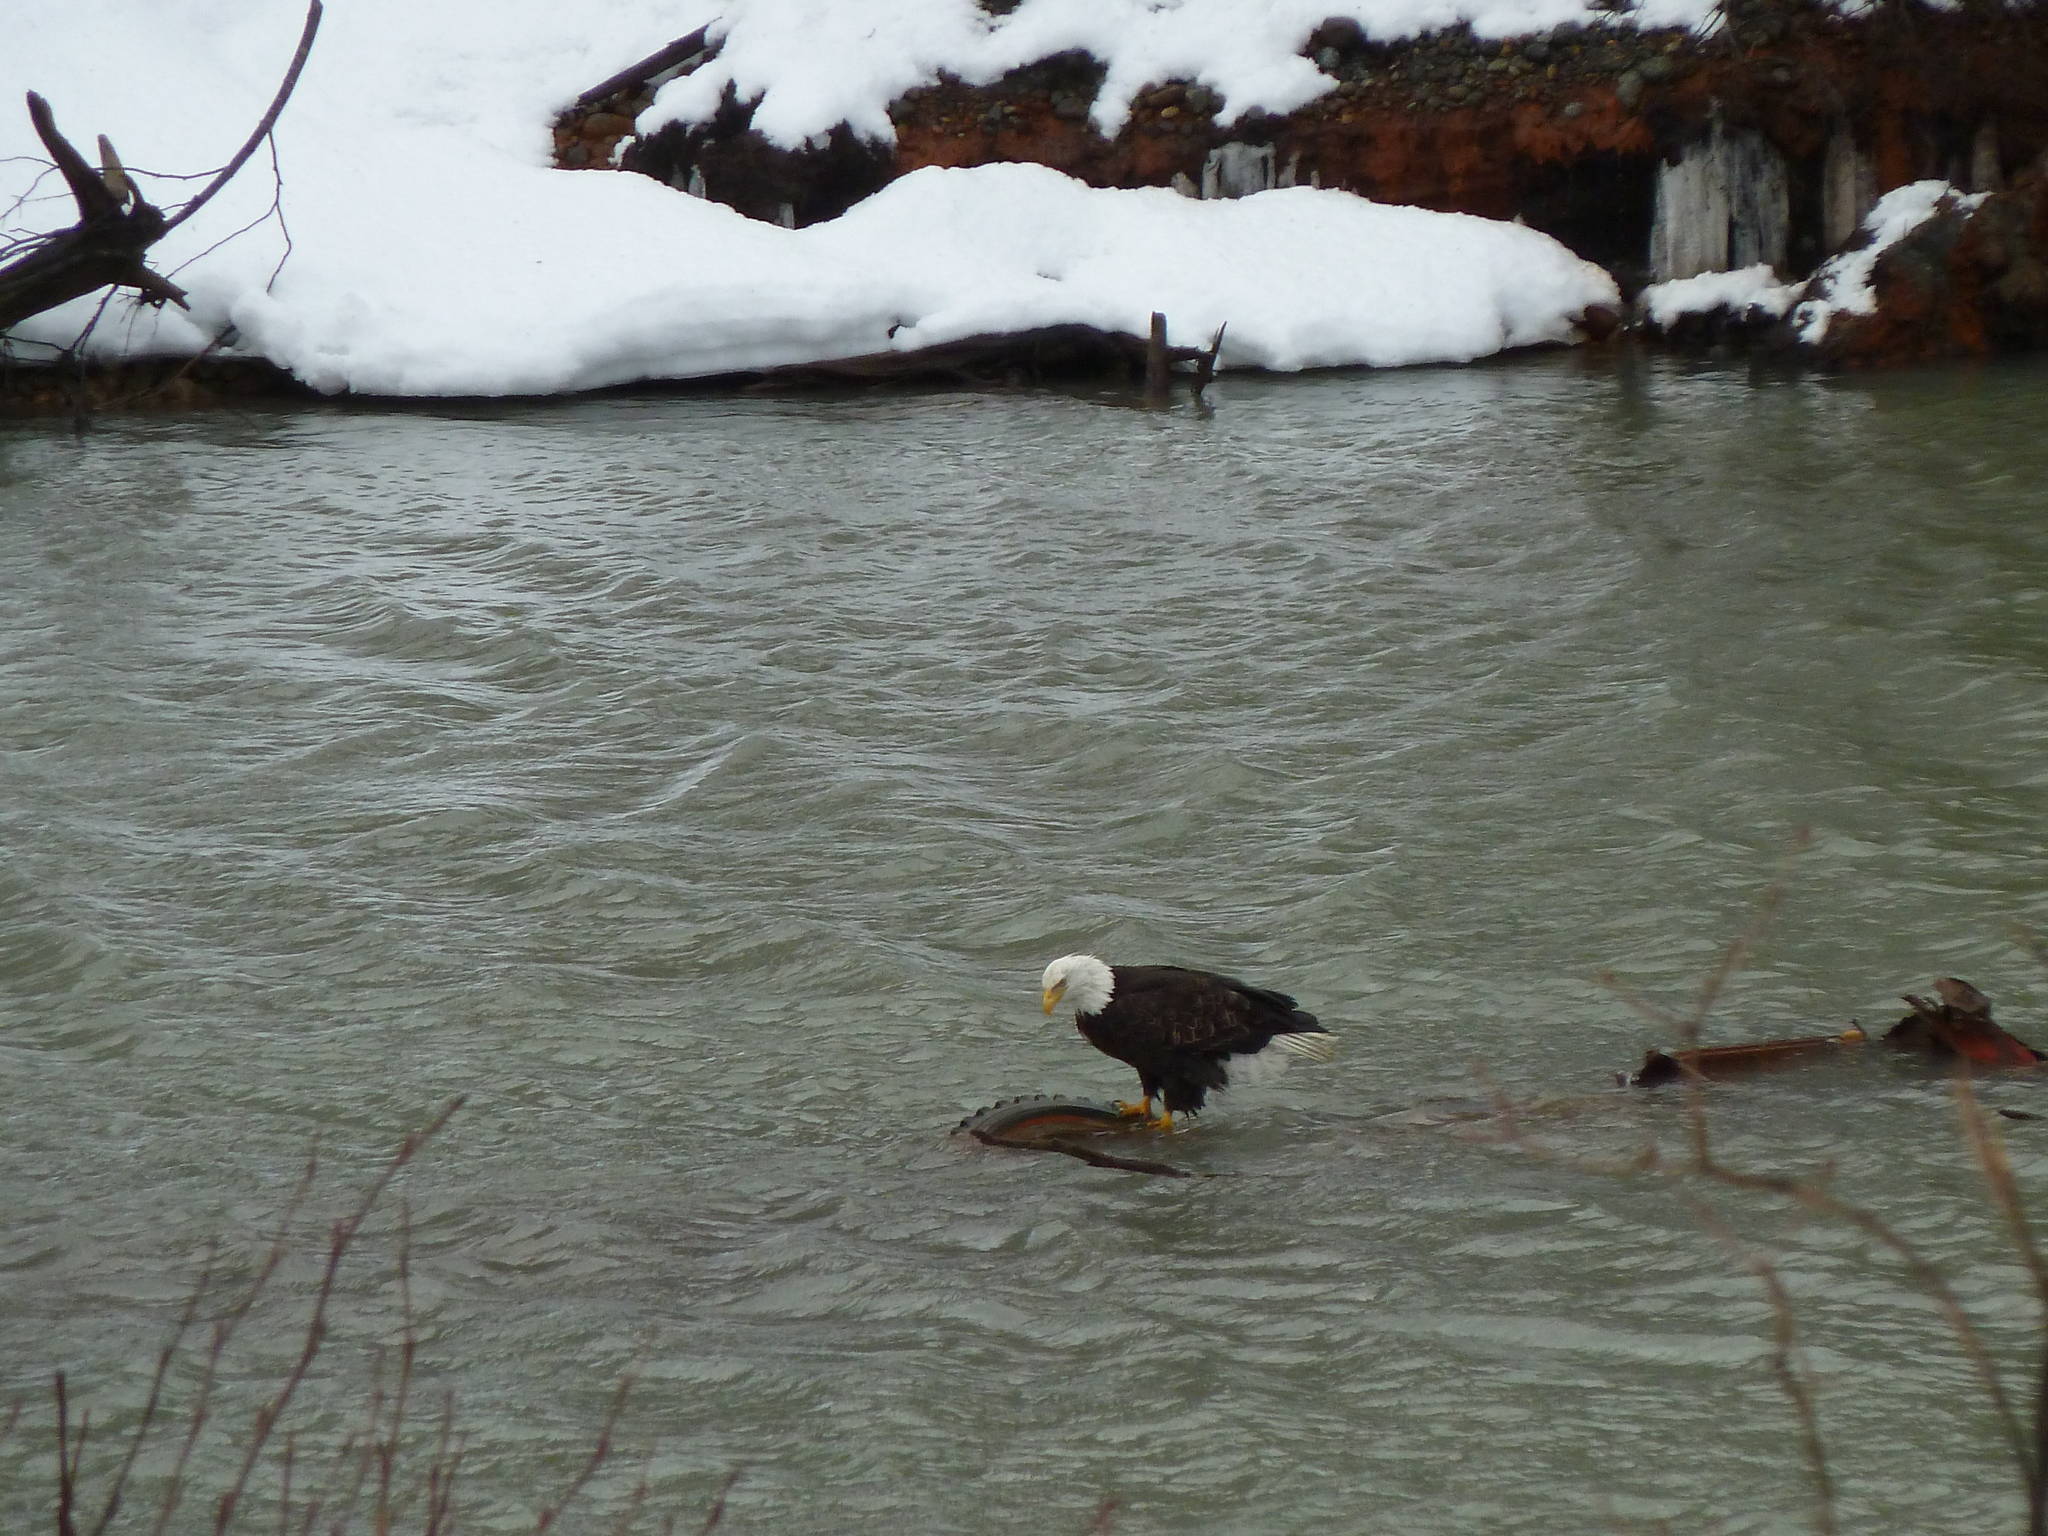 A bald eagle checks out the wheel of a long submerged car body in the Mendenhall river near Marion Drive on March 17th, 2021. “The shifting gravel bars may soon bury it for another long period of time,” writes David Athearn.(Courtesy Photo / David Athearn )